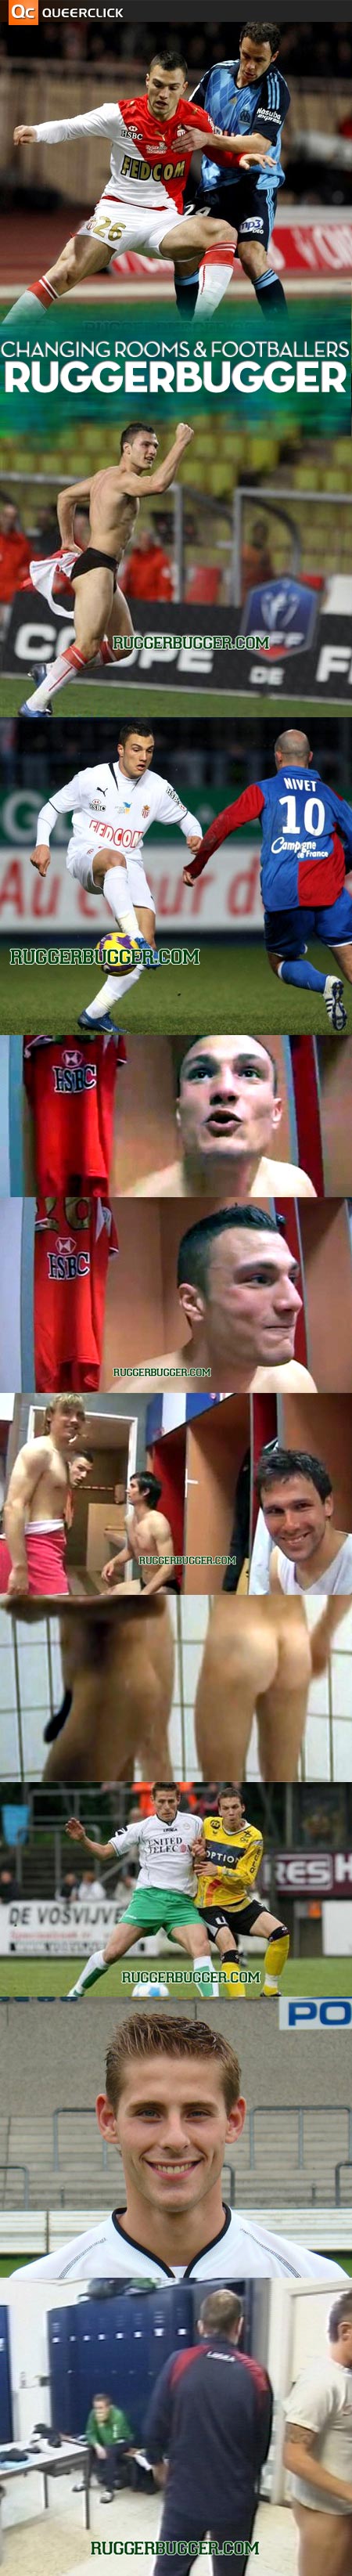 Ruggerbugger takes a look at footballers in changing rooms